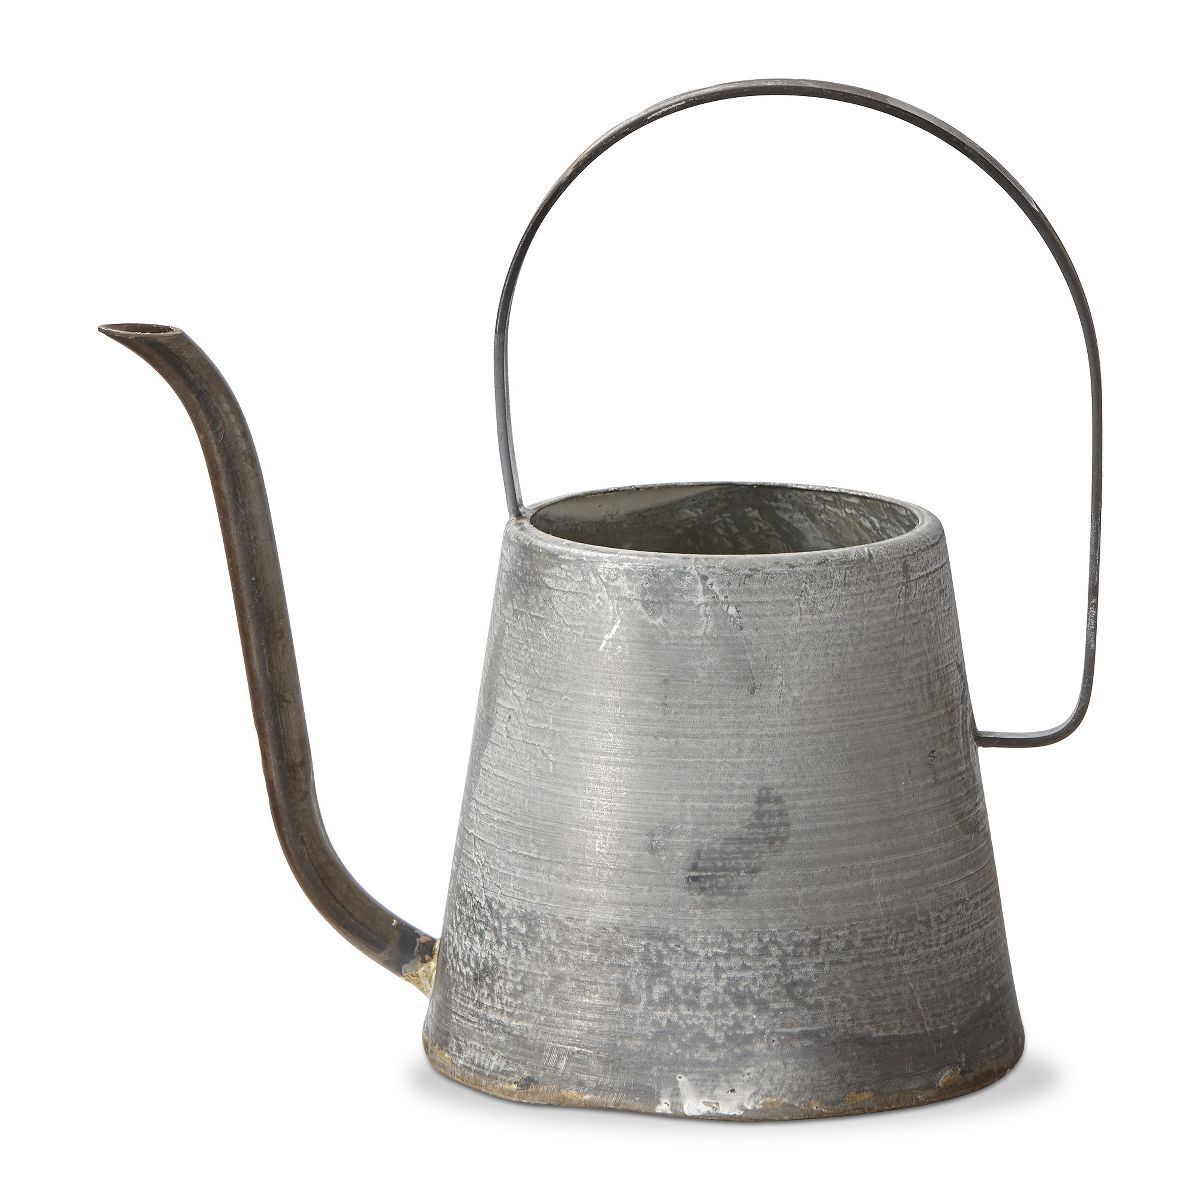 TAG Decorative Iron Vintage Watering Can, 9.5L x5.9W x 9.85H inches, 54 oz. | Target